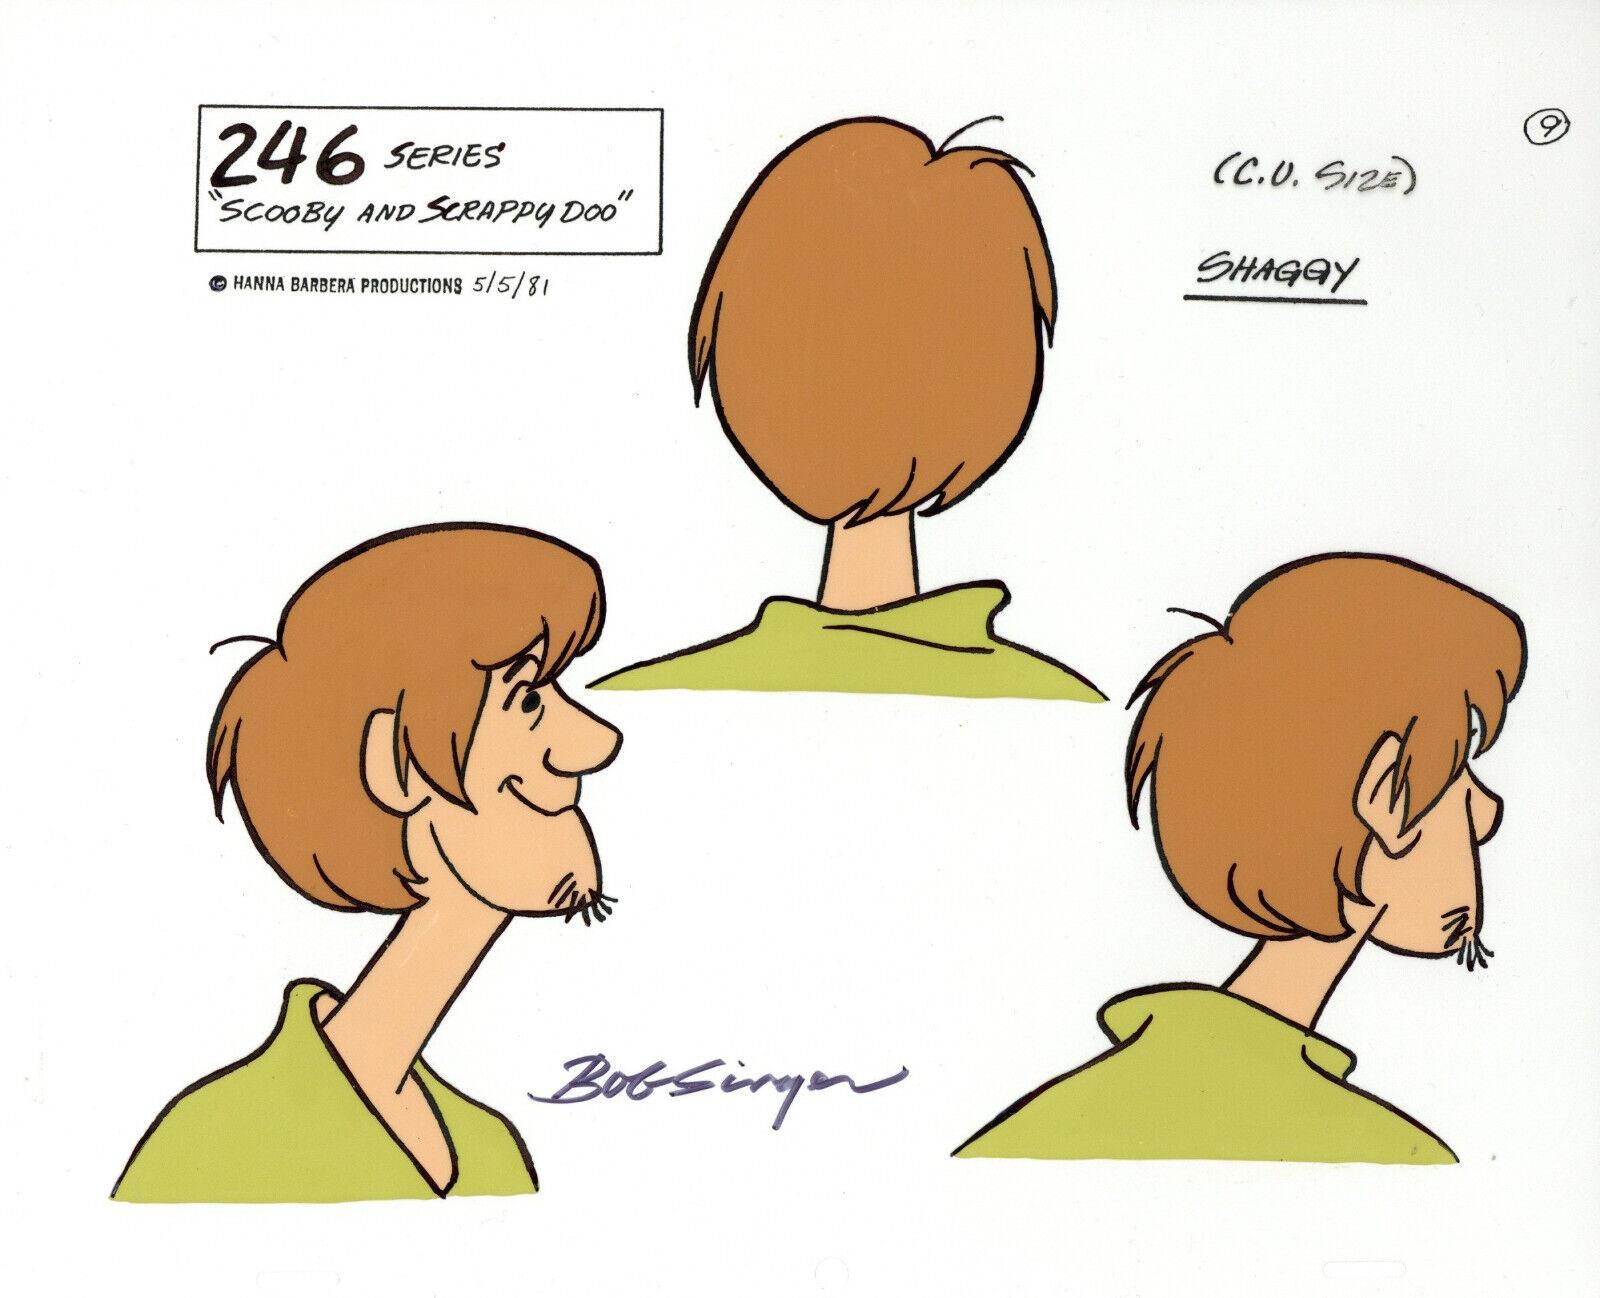 Scooby and Scrappy Doo Model Sheet of 3 Shaggy Heads signed by Bob Singer - Art by Hanna Barbera Studio Artists